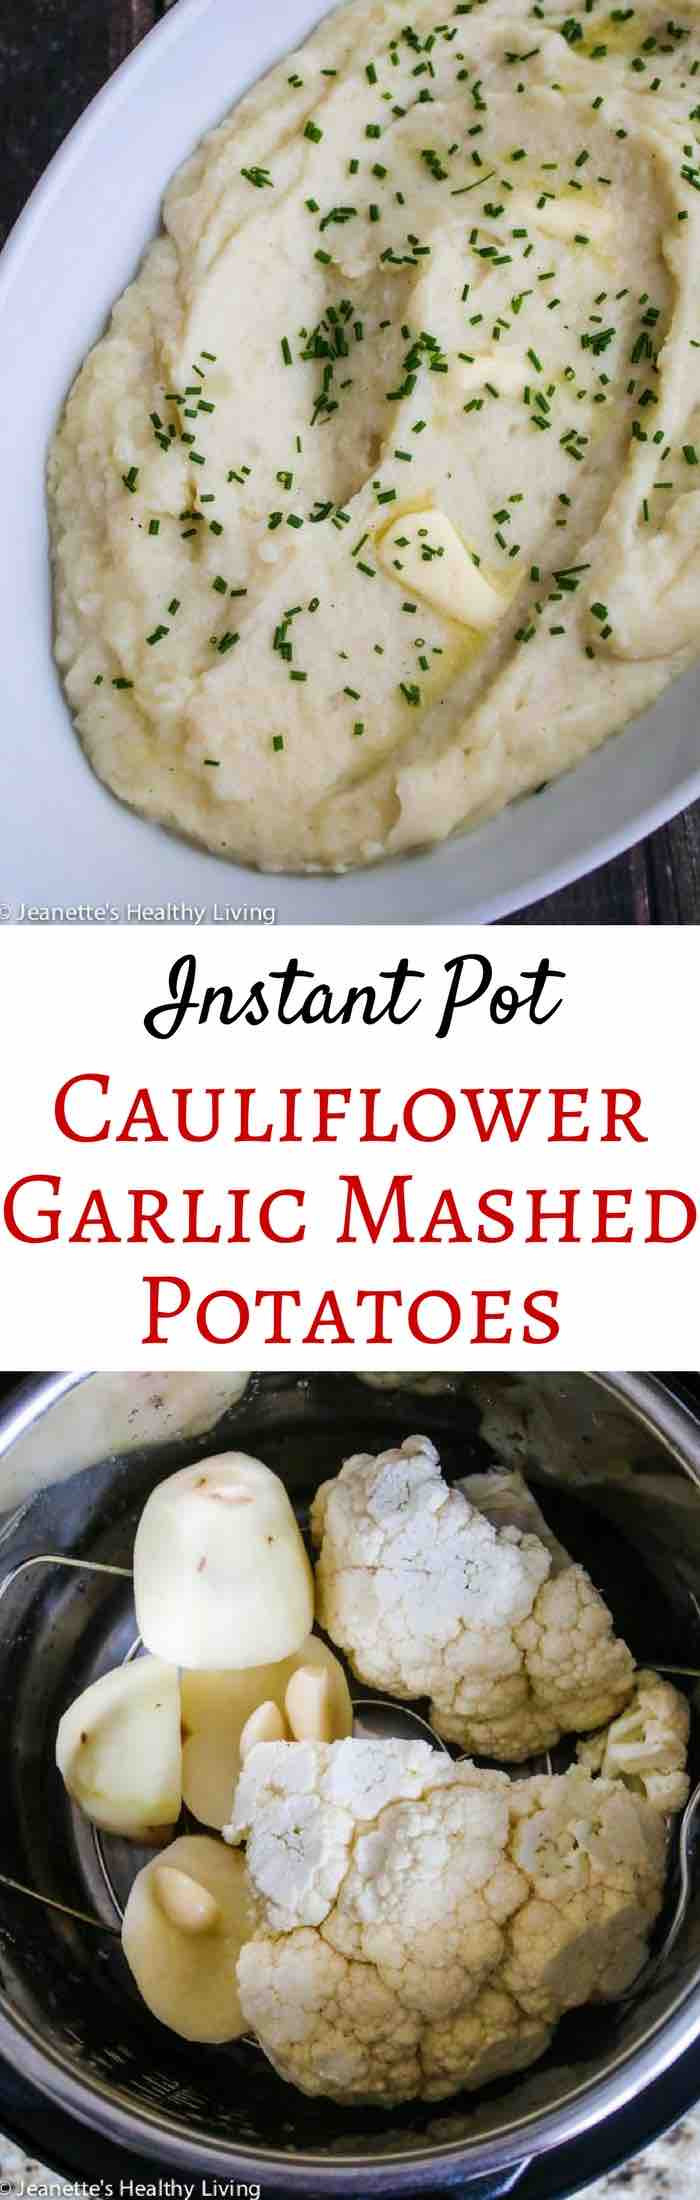 Are Instant Mashed Potatoes Healthy
 Cauliflower Garlic Mashed Potatoes Instant Pot